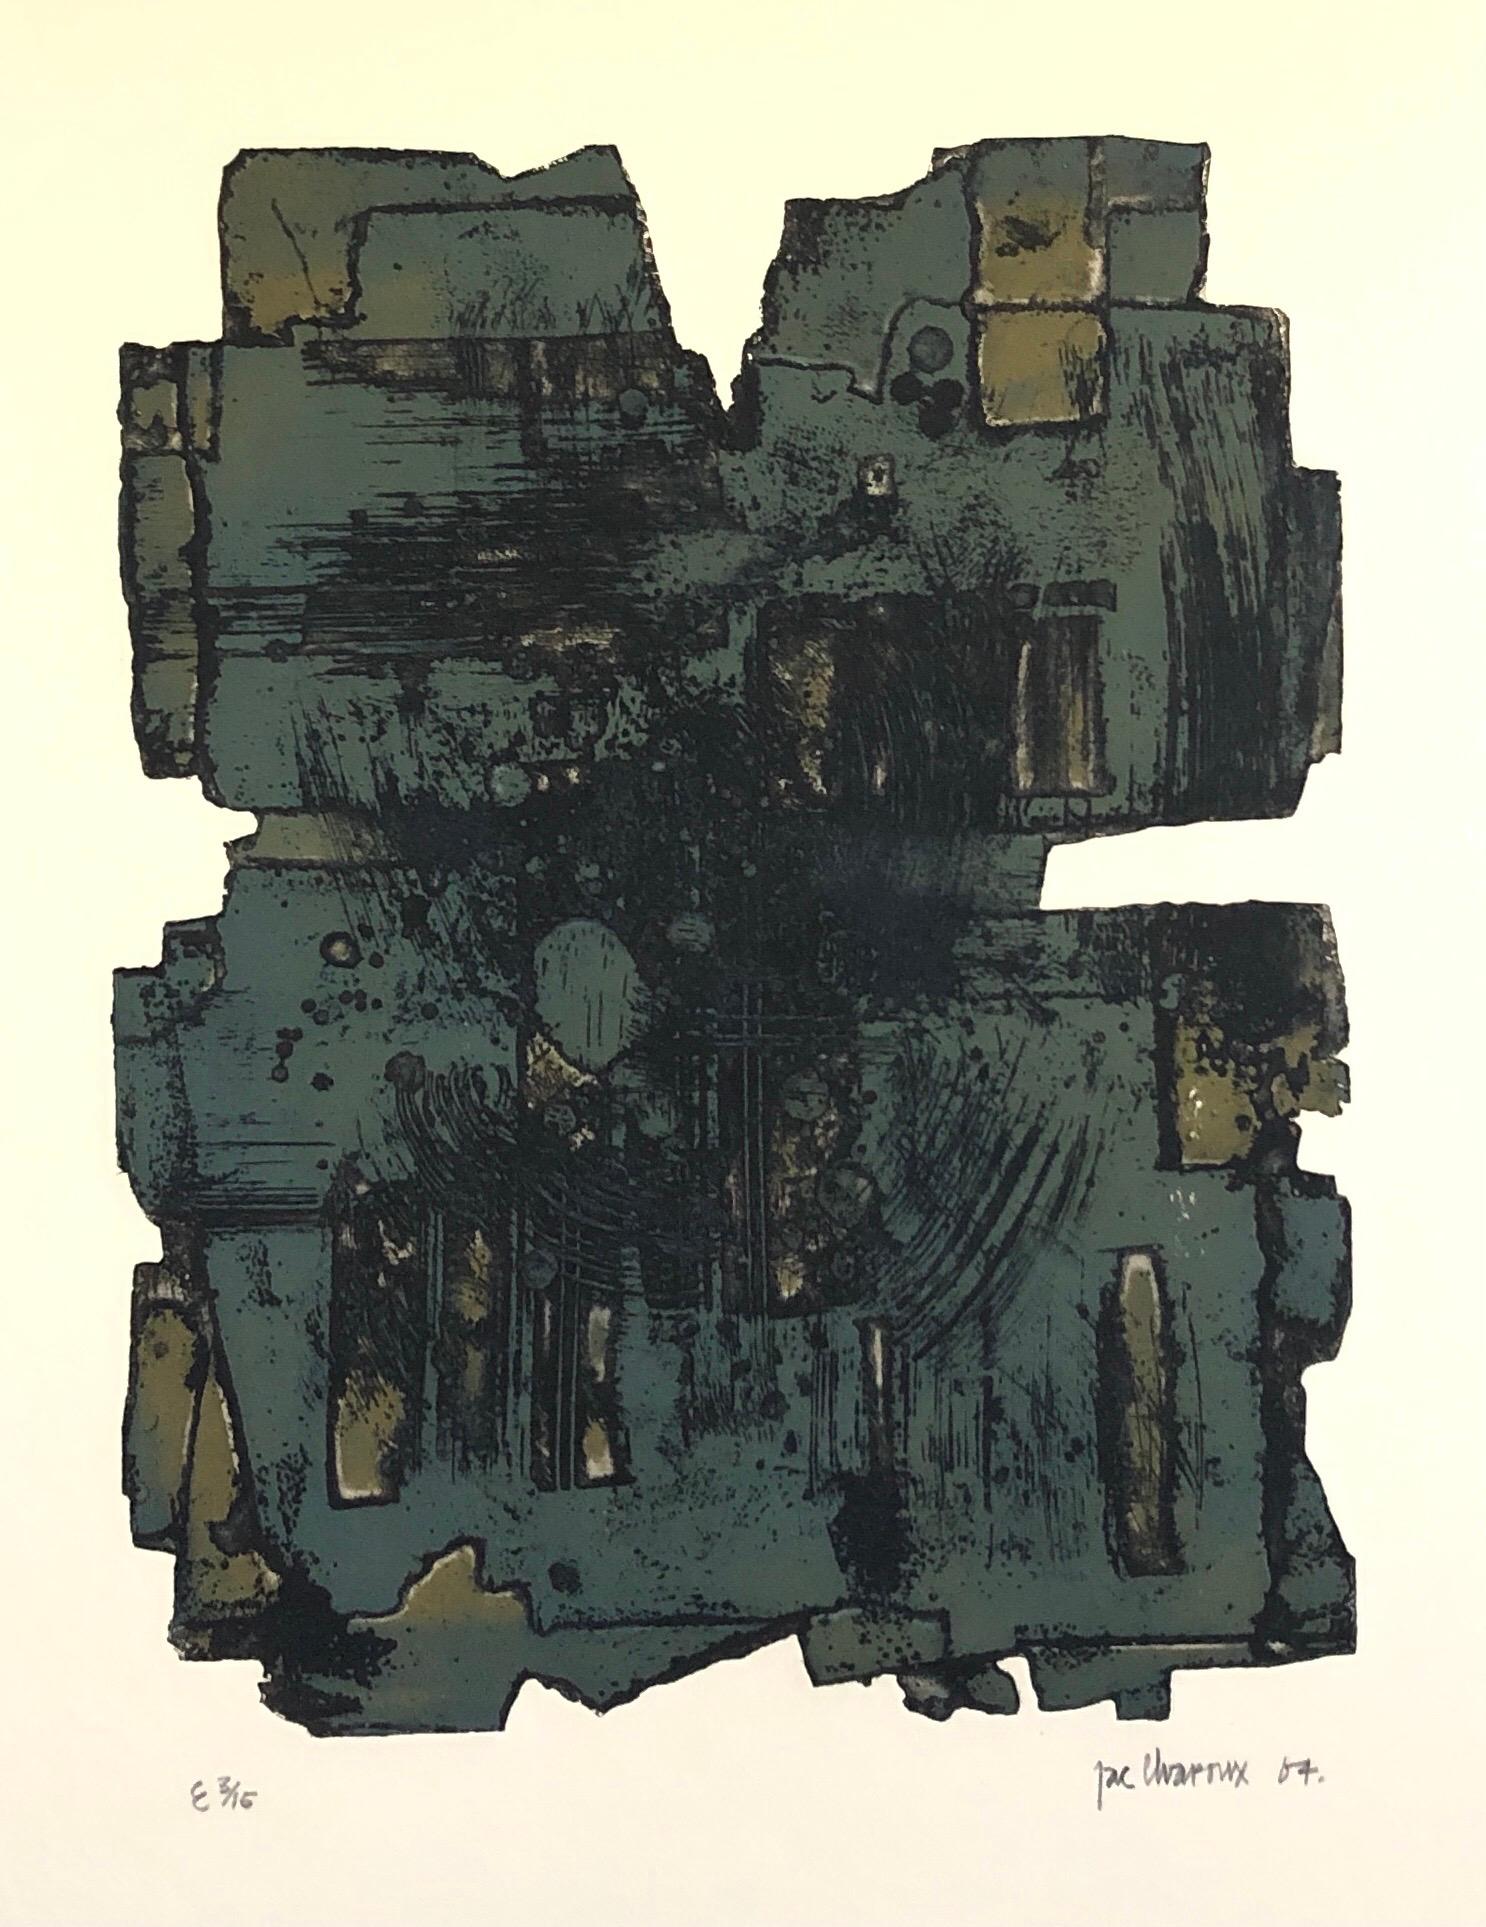 Jacques (Jac) Charoux Abstract Print - 1964 Jac Charoux Textured Abstract Etching Brutalist Art Brut Print